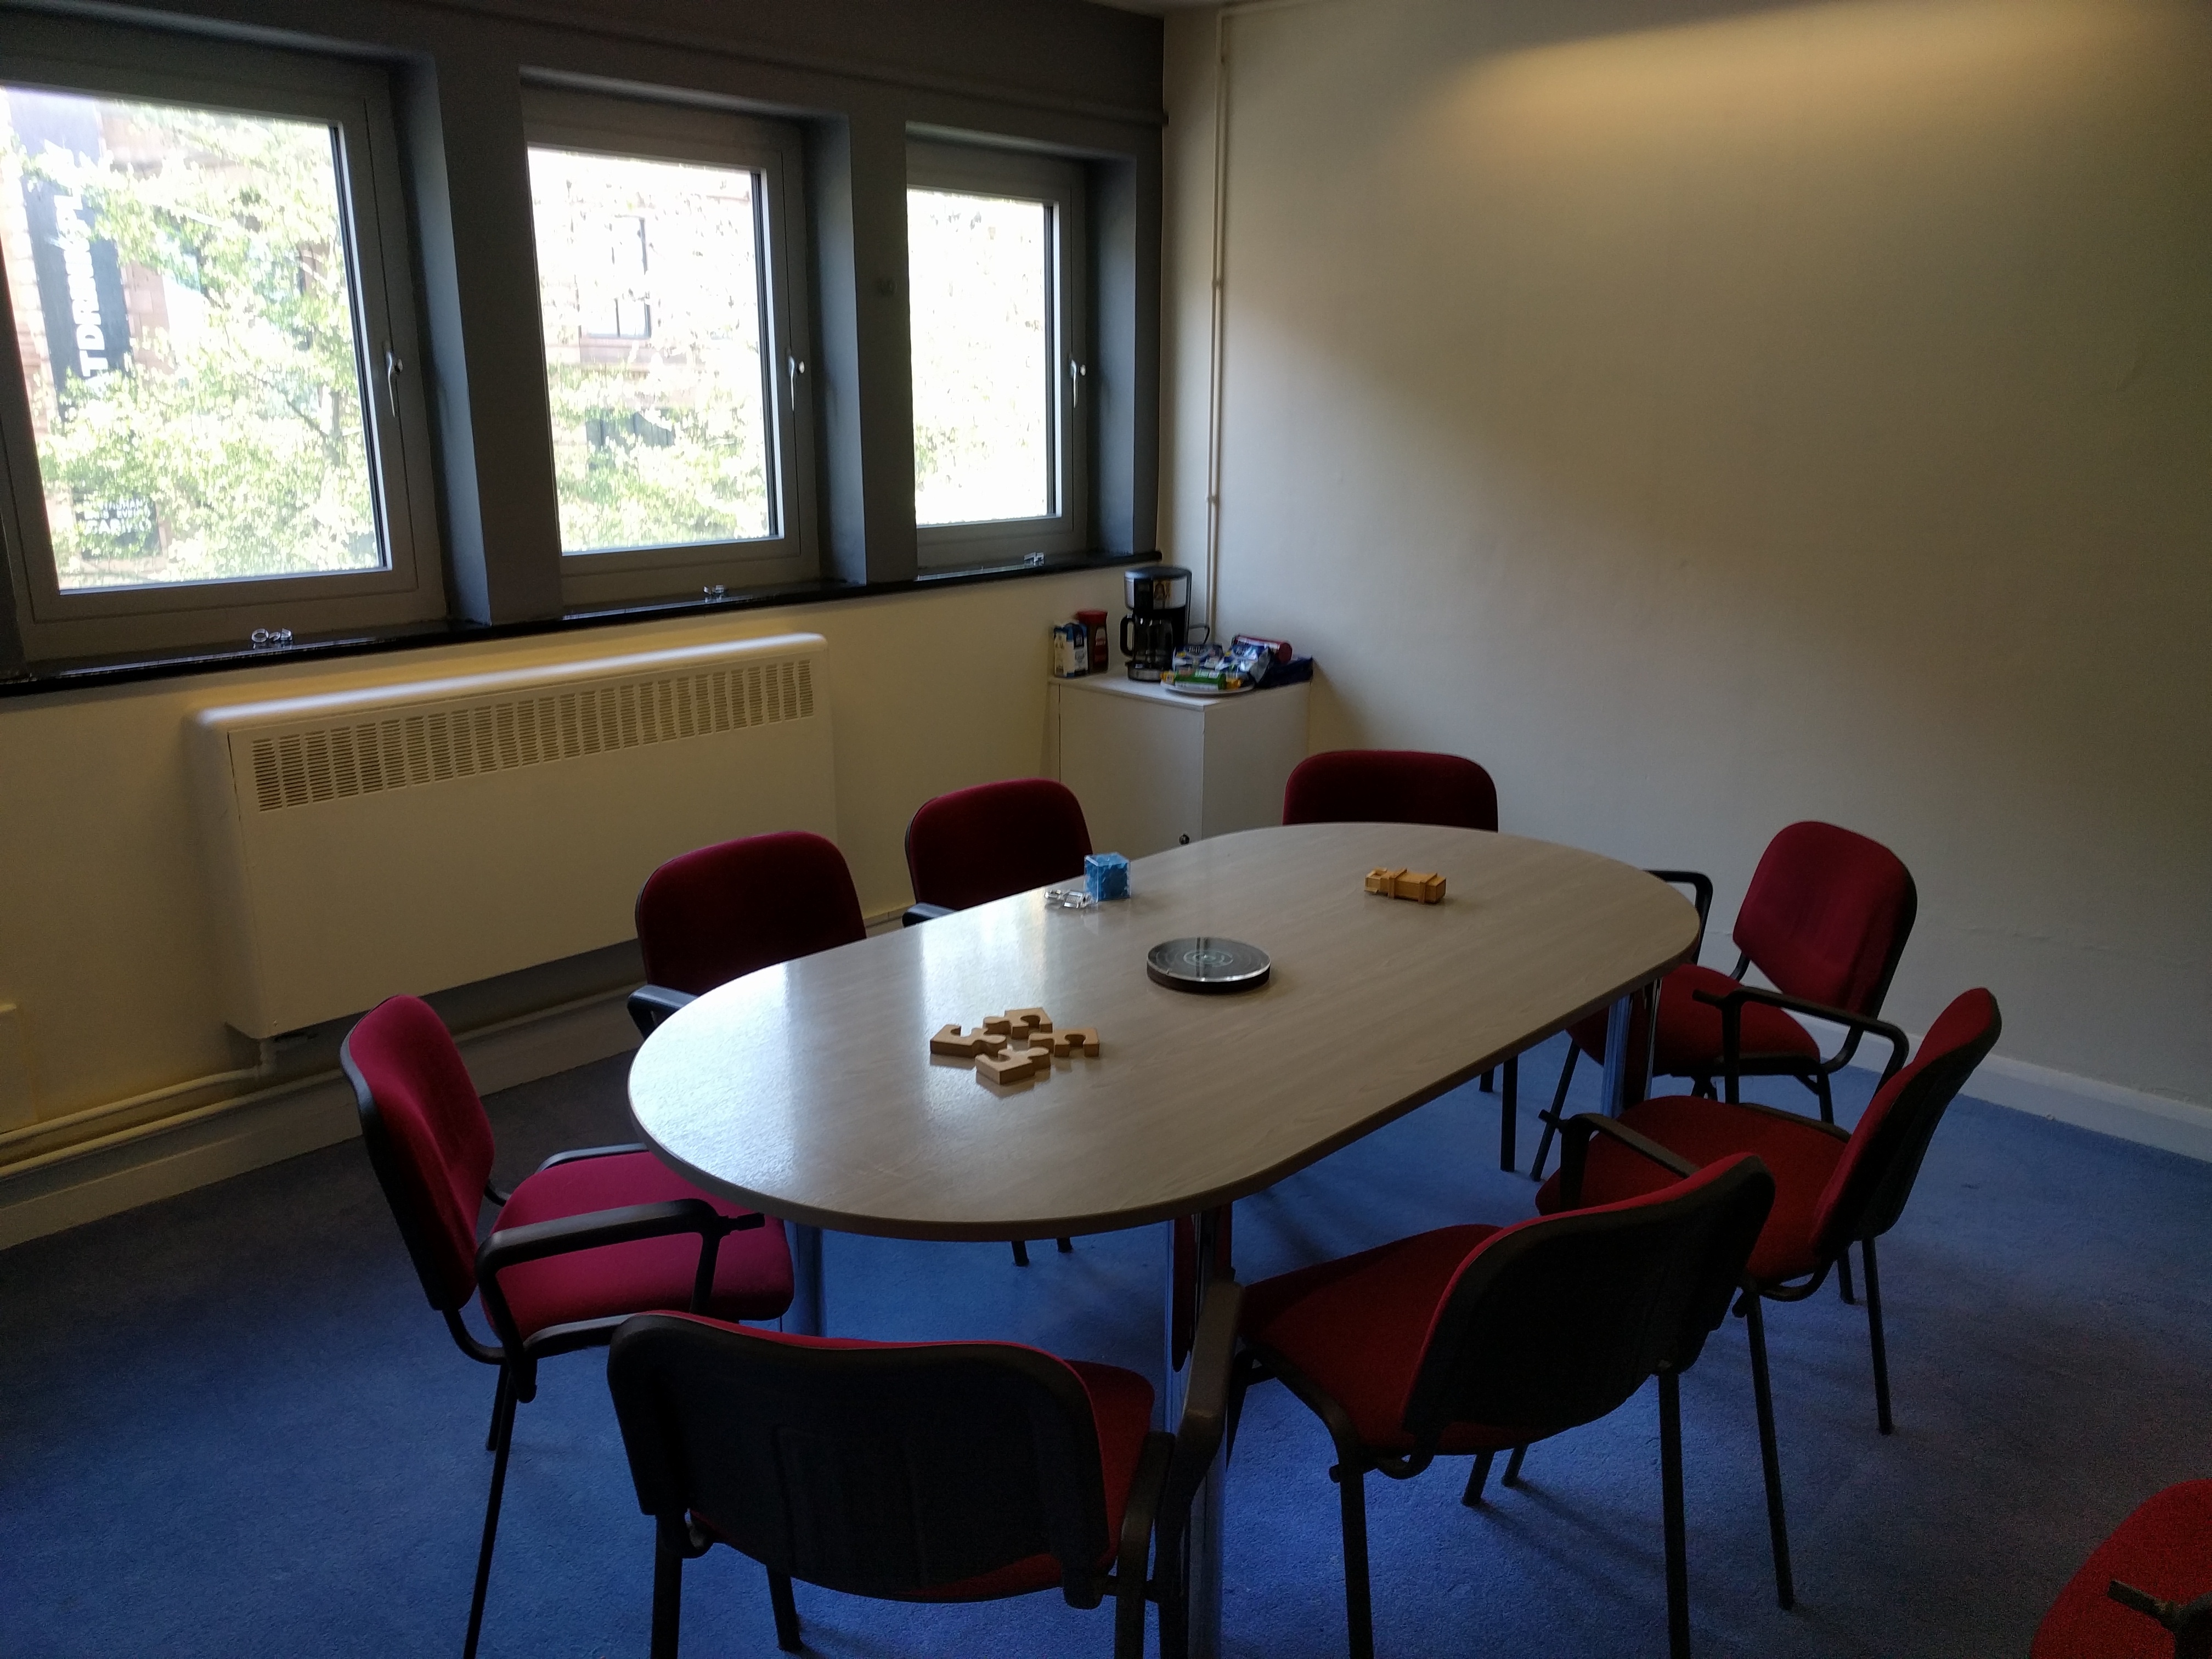 Meeting facilities at Cryptology Nottingham suitable for up to 20 people